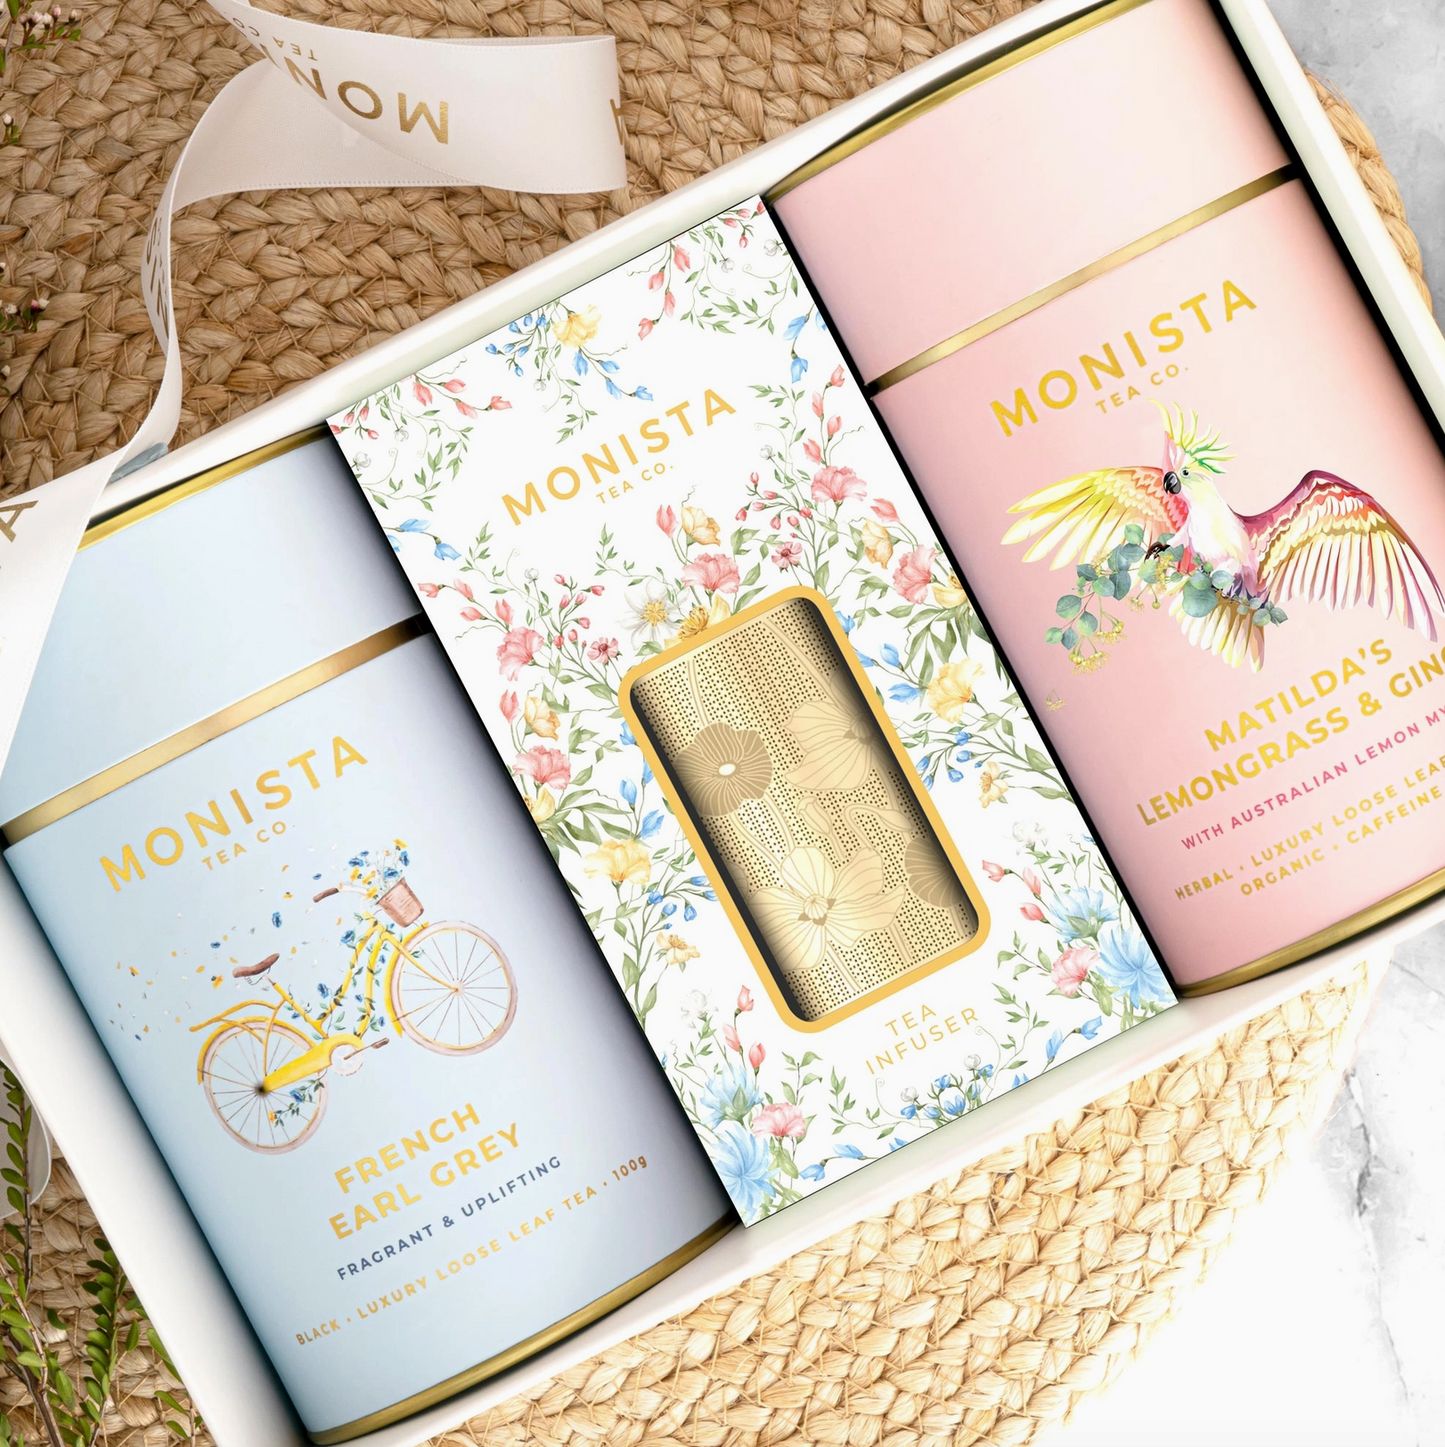 Madame Coco's 'Tea For A Lady' Gift Set